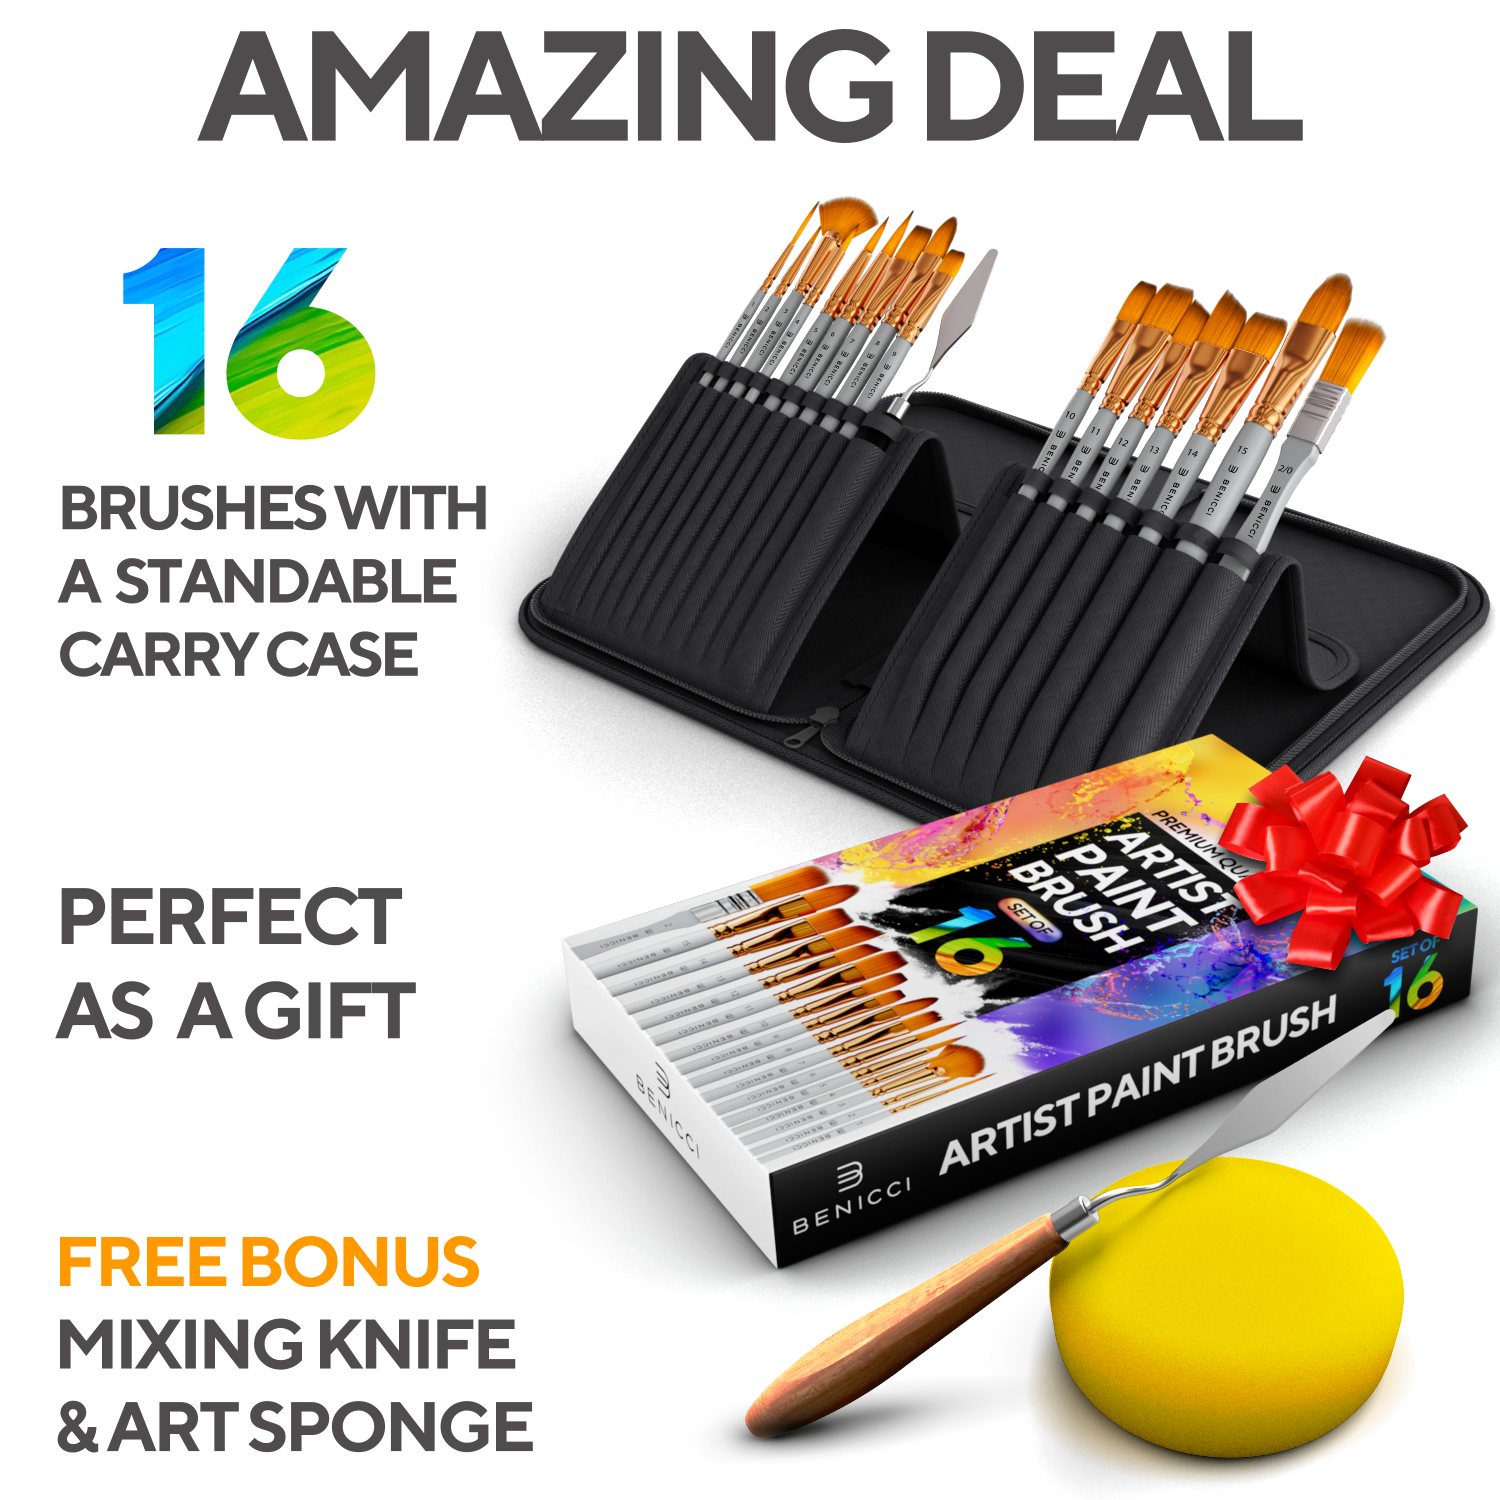 Professional Miniature Paint Brushes - Paint Brush Set of 10 Detail Paint Brushes - for Fine & Art Painting - w/ Comfortable Grip Handles - Perfect